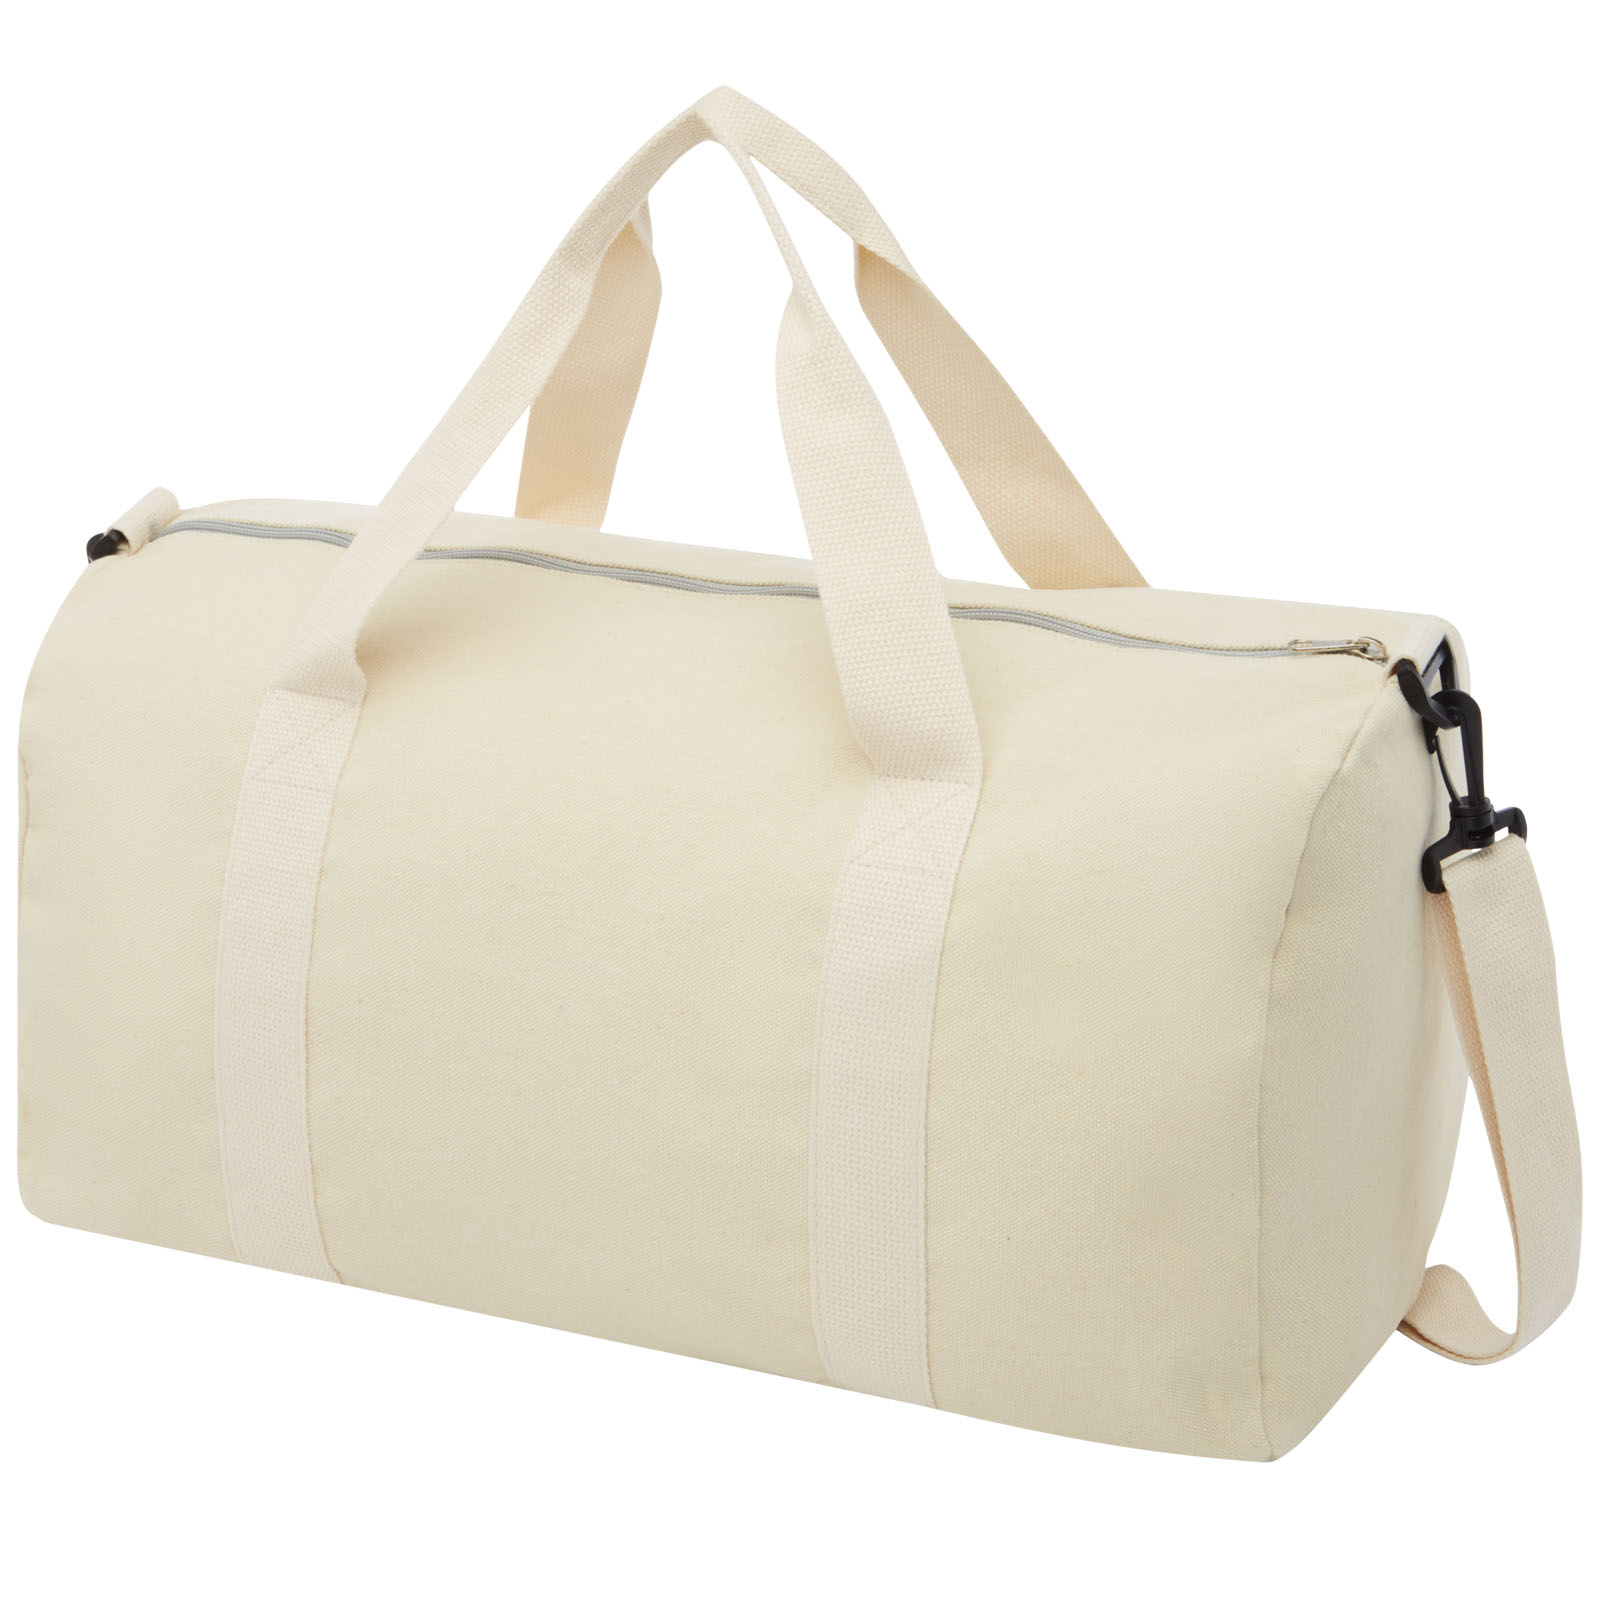 Advertising Sailor Bags - Pheebs 450 g/m² recycled cotton and polyester duffel bag 24L - 0